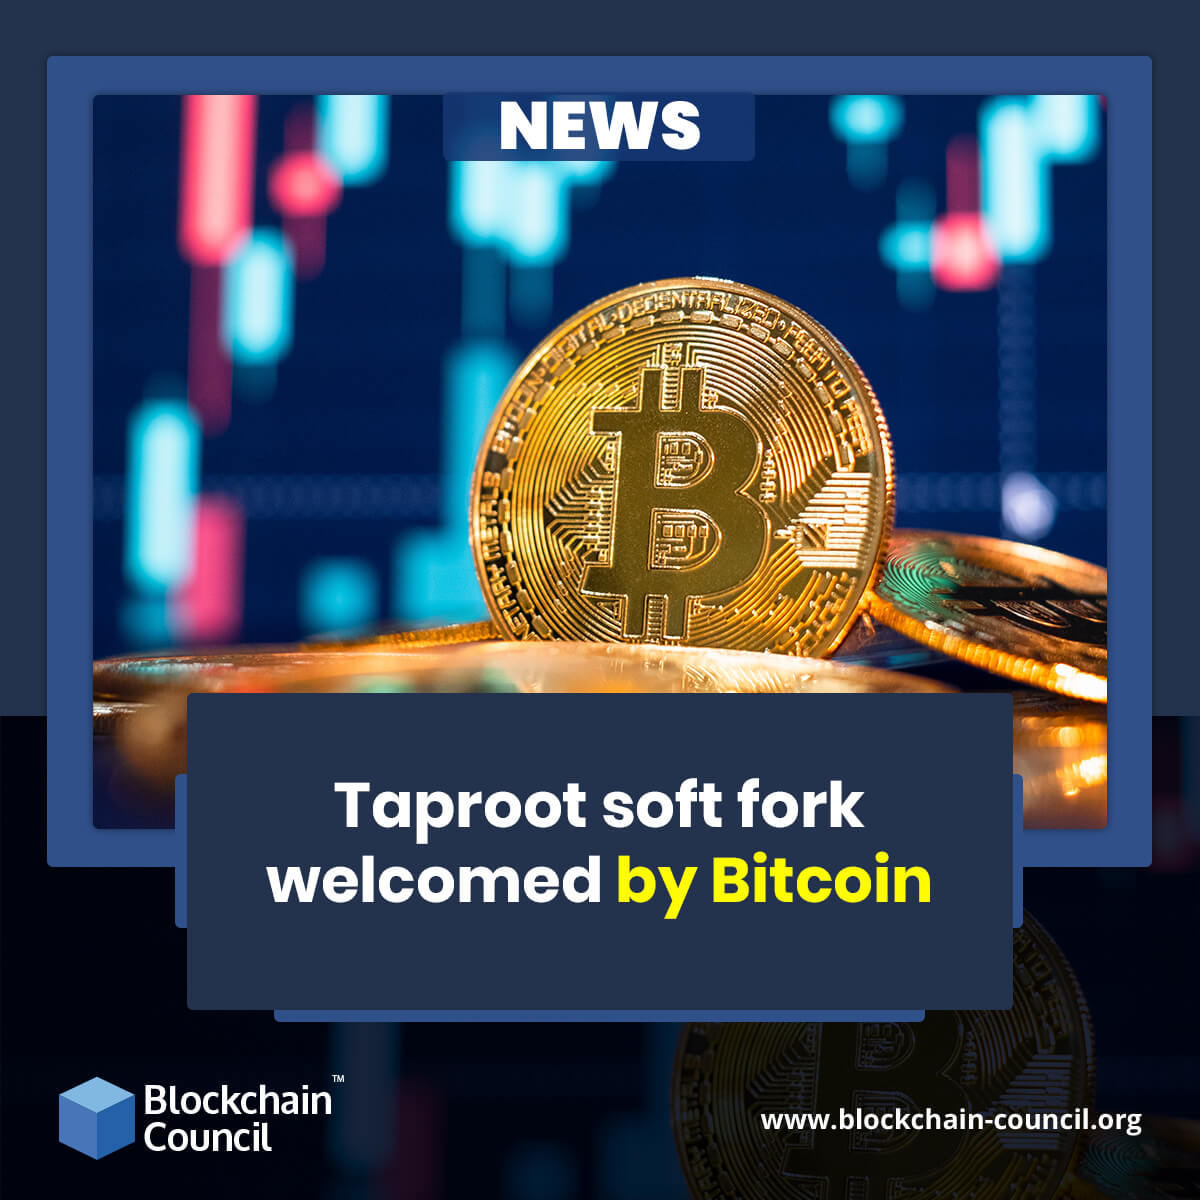 Taproot soft fork welcomed by Bitcoin